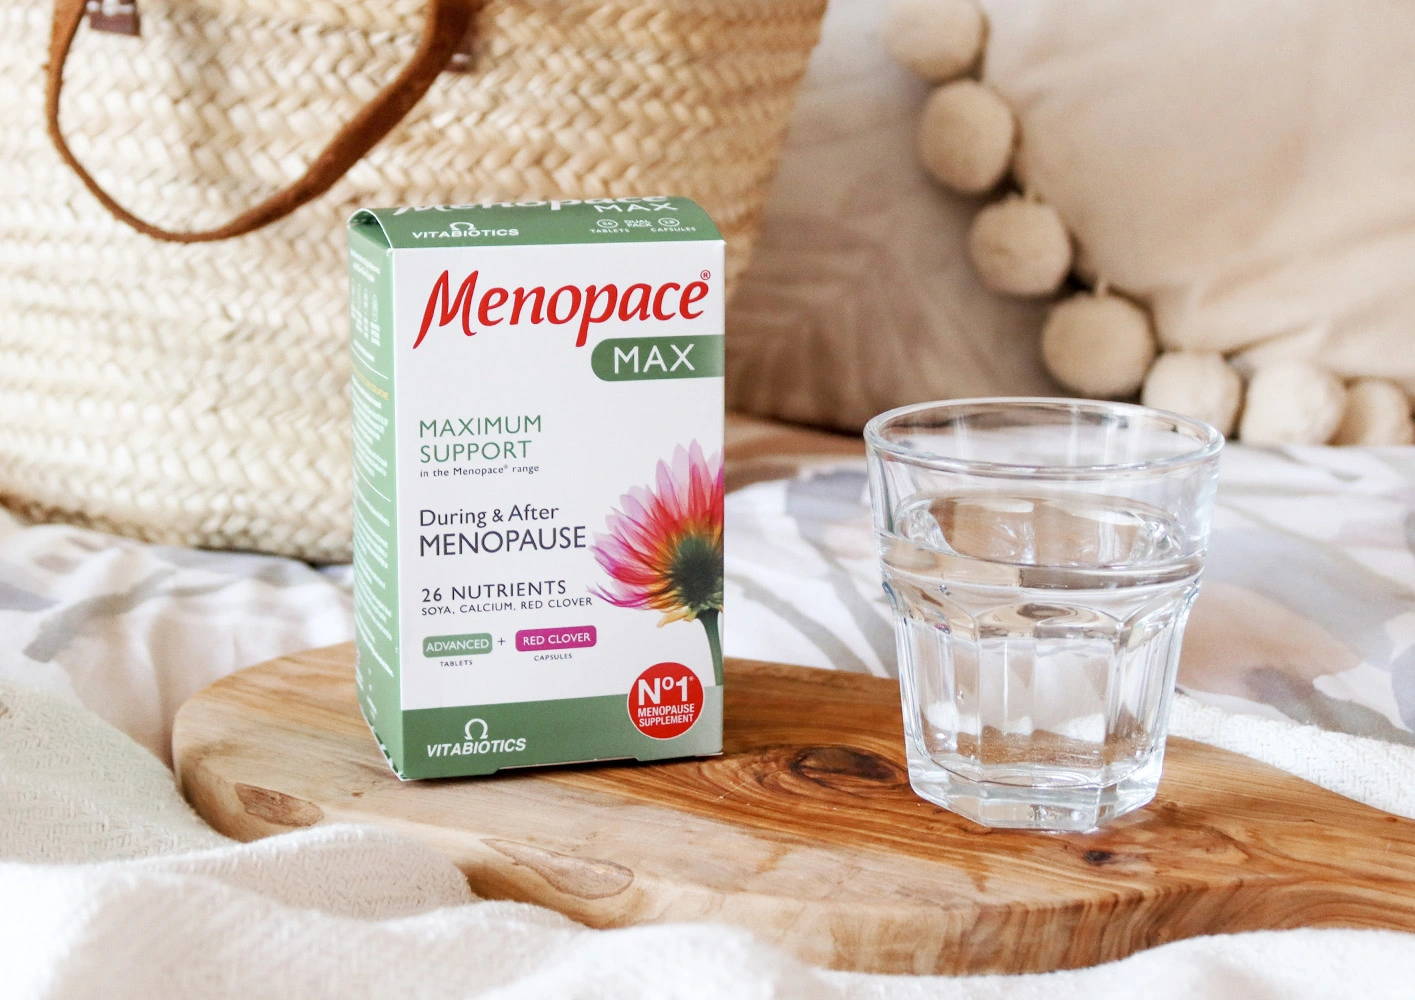 Menopace Voted The Most Trusted Menopause Supplement